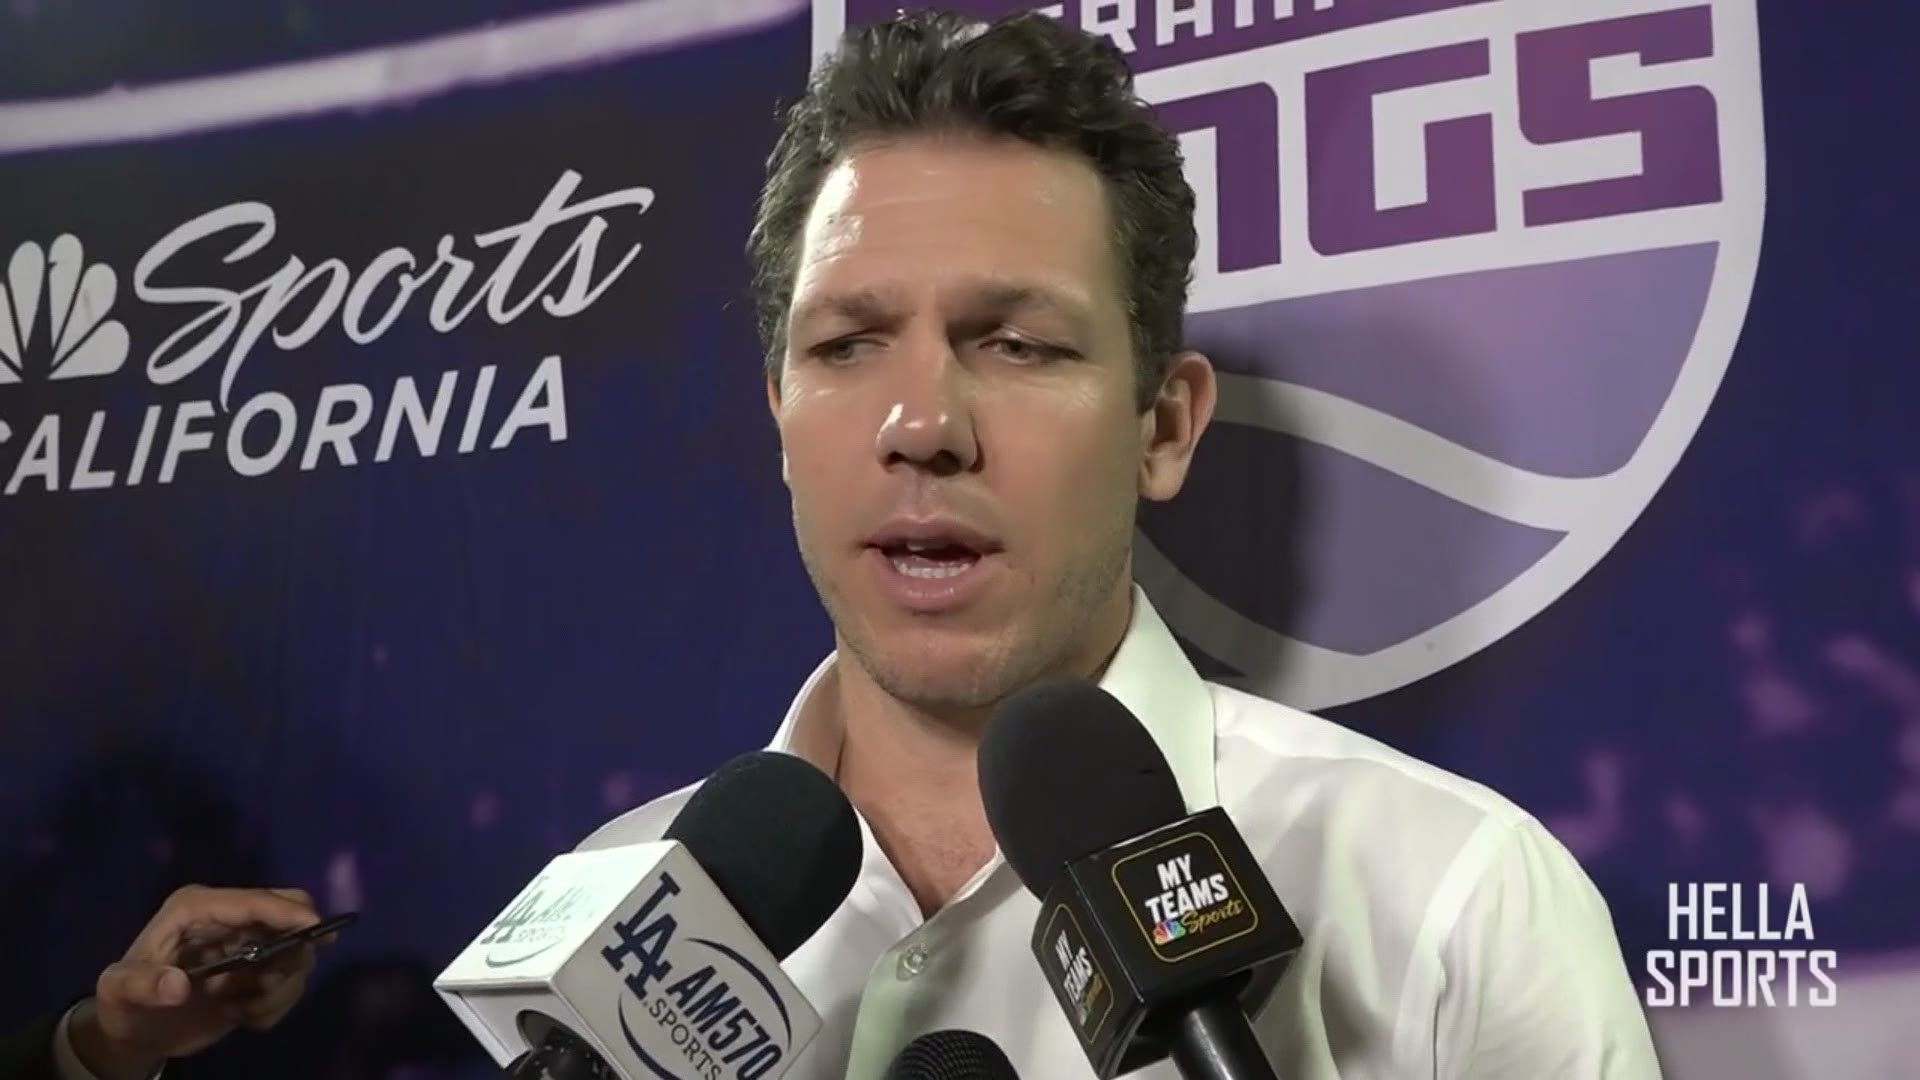 Kings head coach Luke Walton discusses Saturday's 112-103 victory in Los Angeles over the Clippers and the defensive effort early sparking his team.